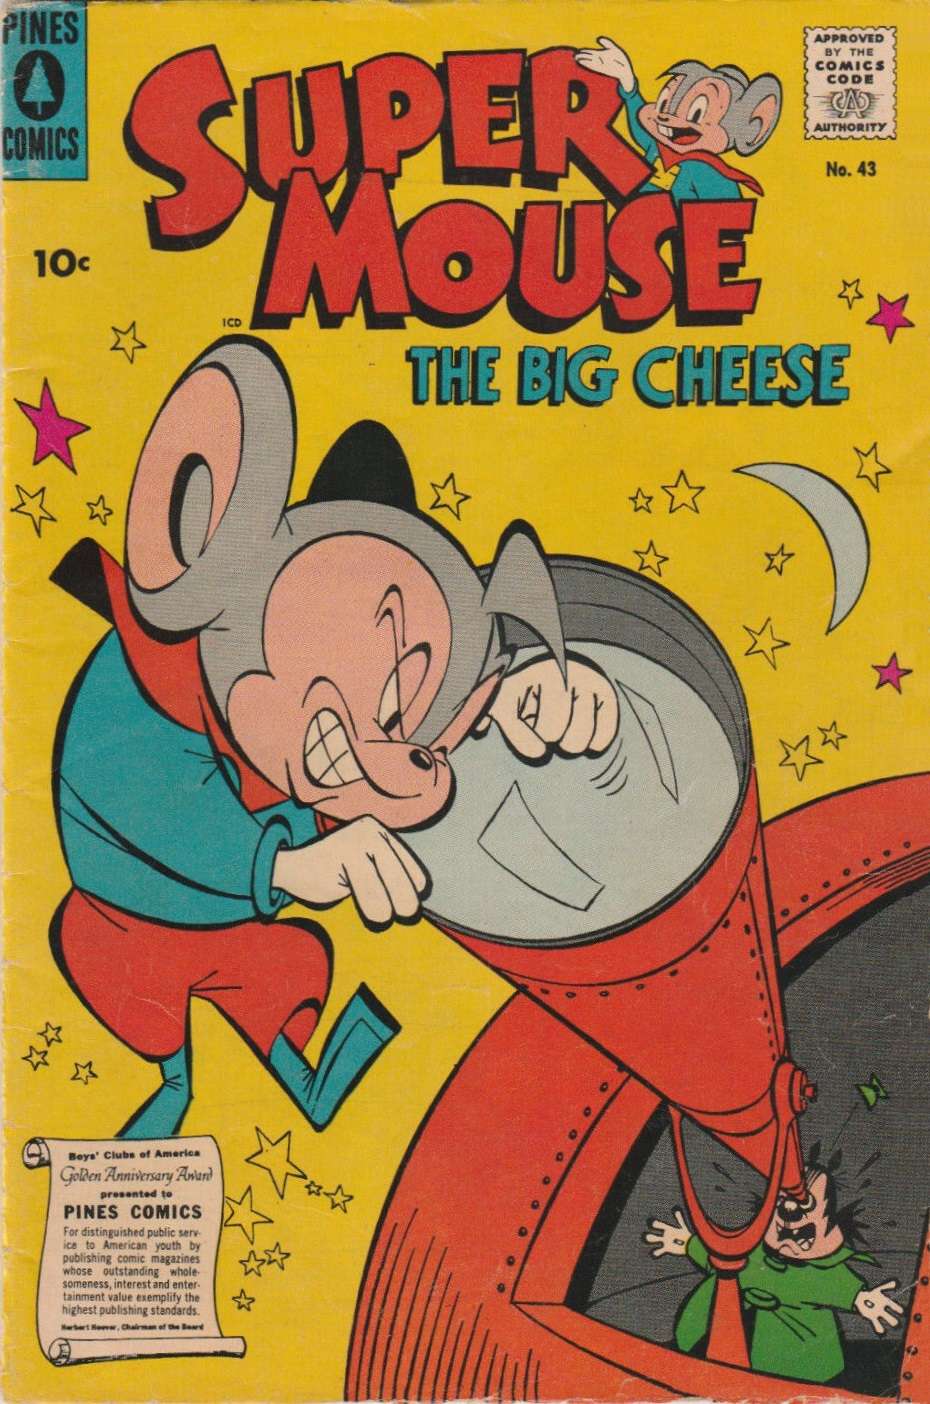 Book Cover For Supermouse 43 - Version 2